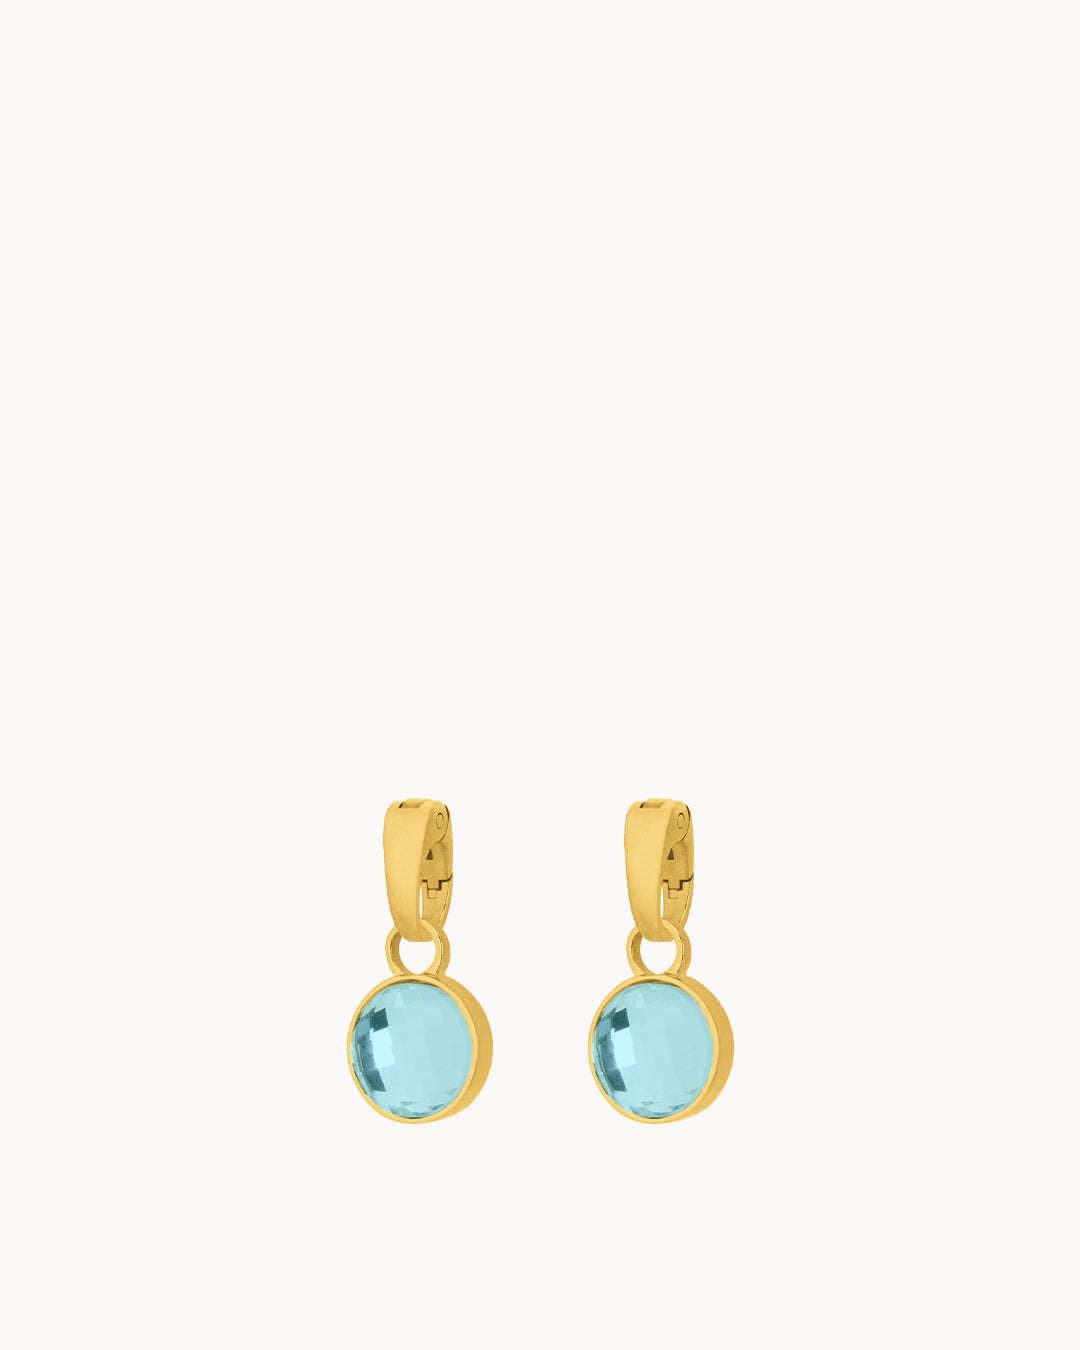 March Birthstone Peace Dainty Signature Earring Pendants, Gold